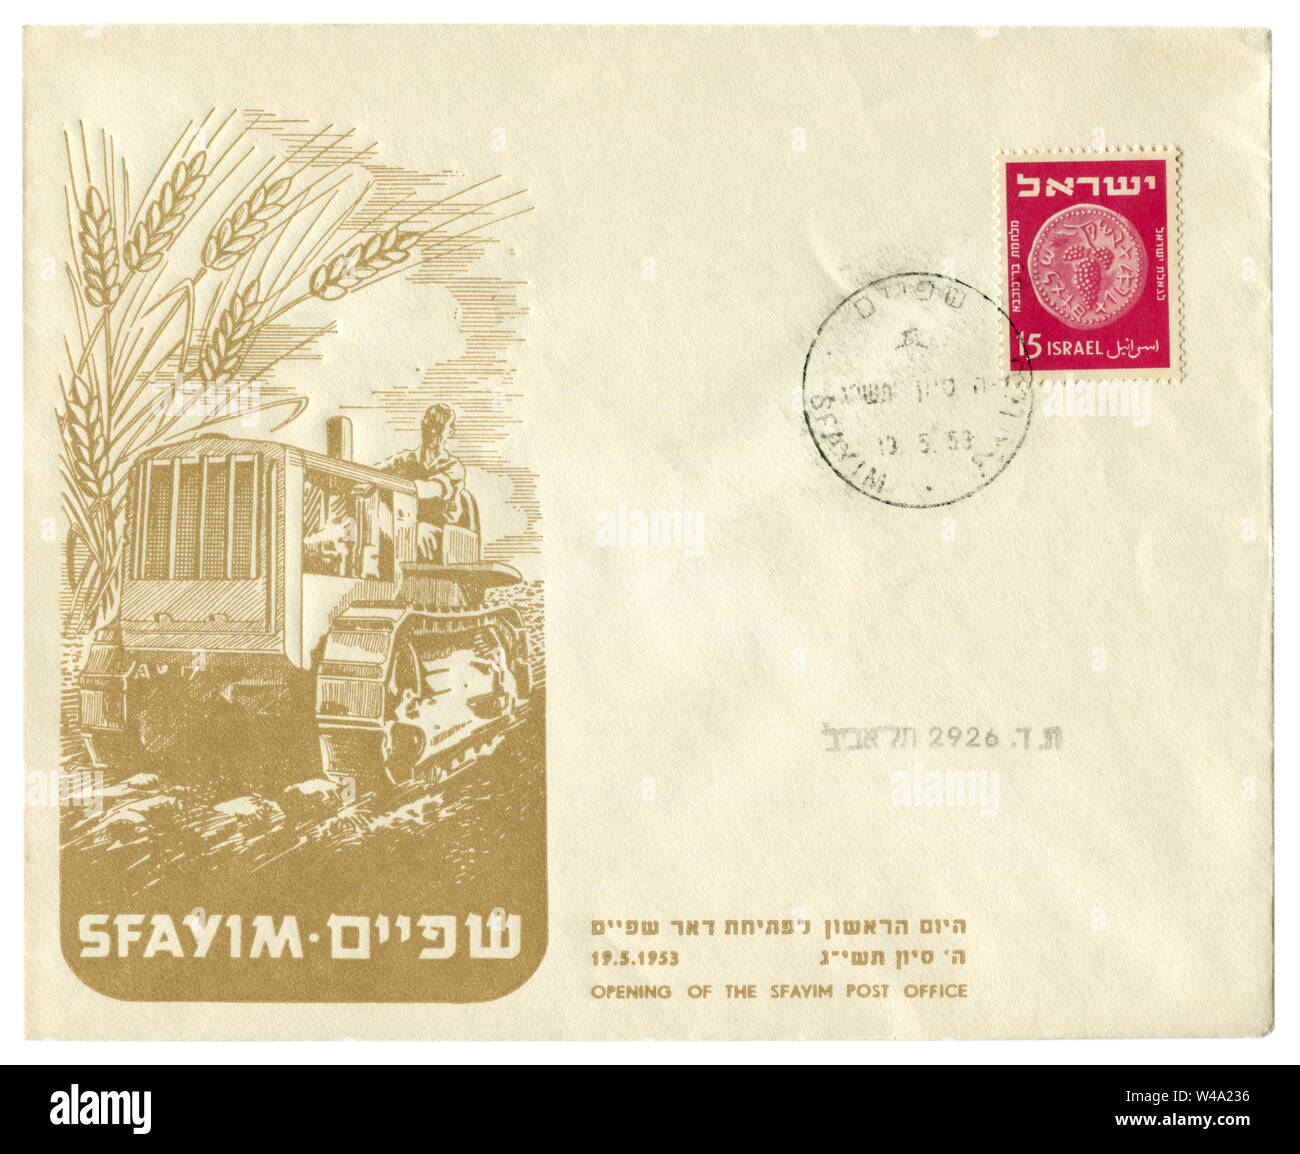 Sfayim, Israel - 19 May 1953: Israeli historical envelope: cover with cachet opening post office, farmer on a tractor plowing the field, Ears of wheat Stock Photo